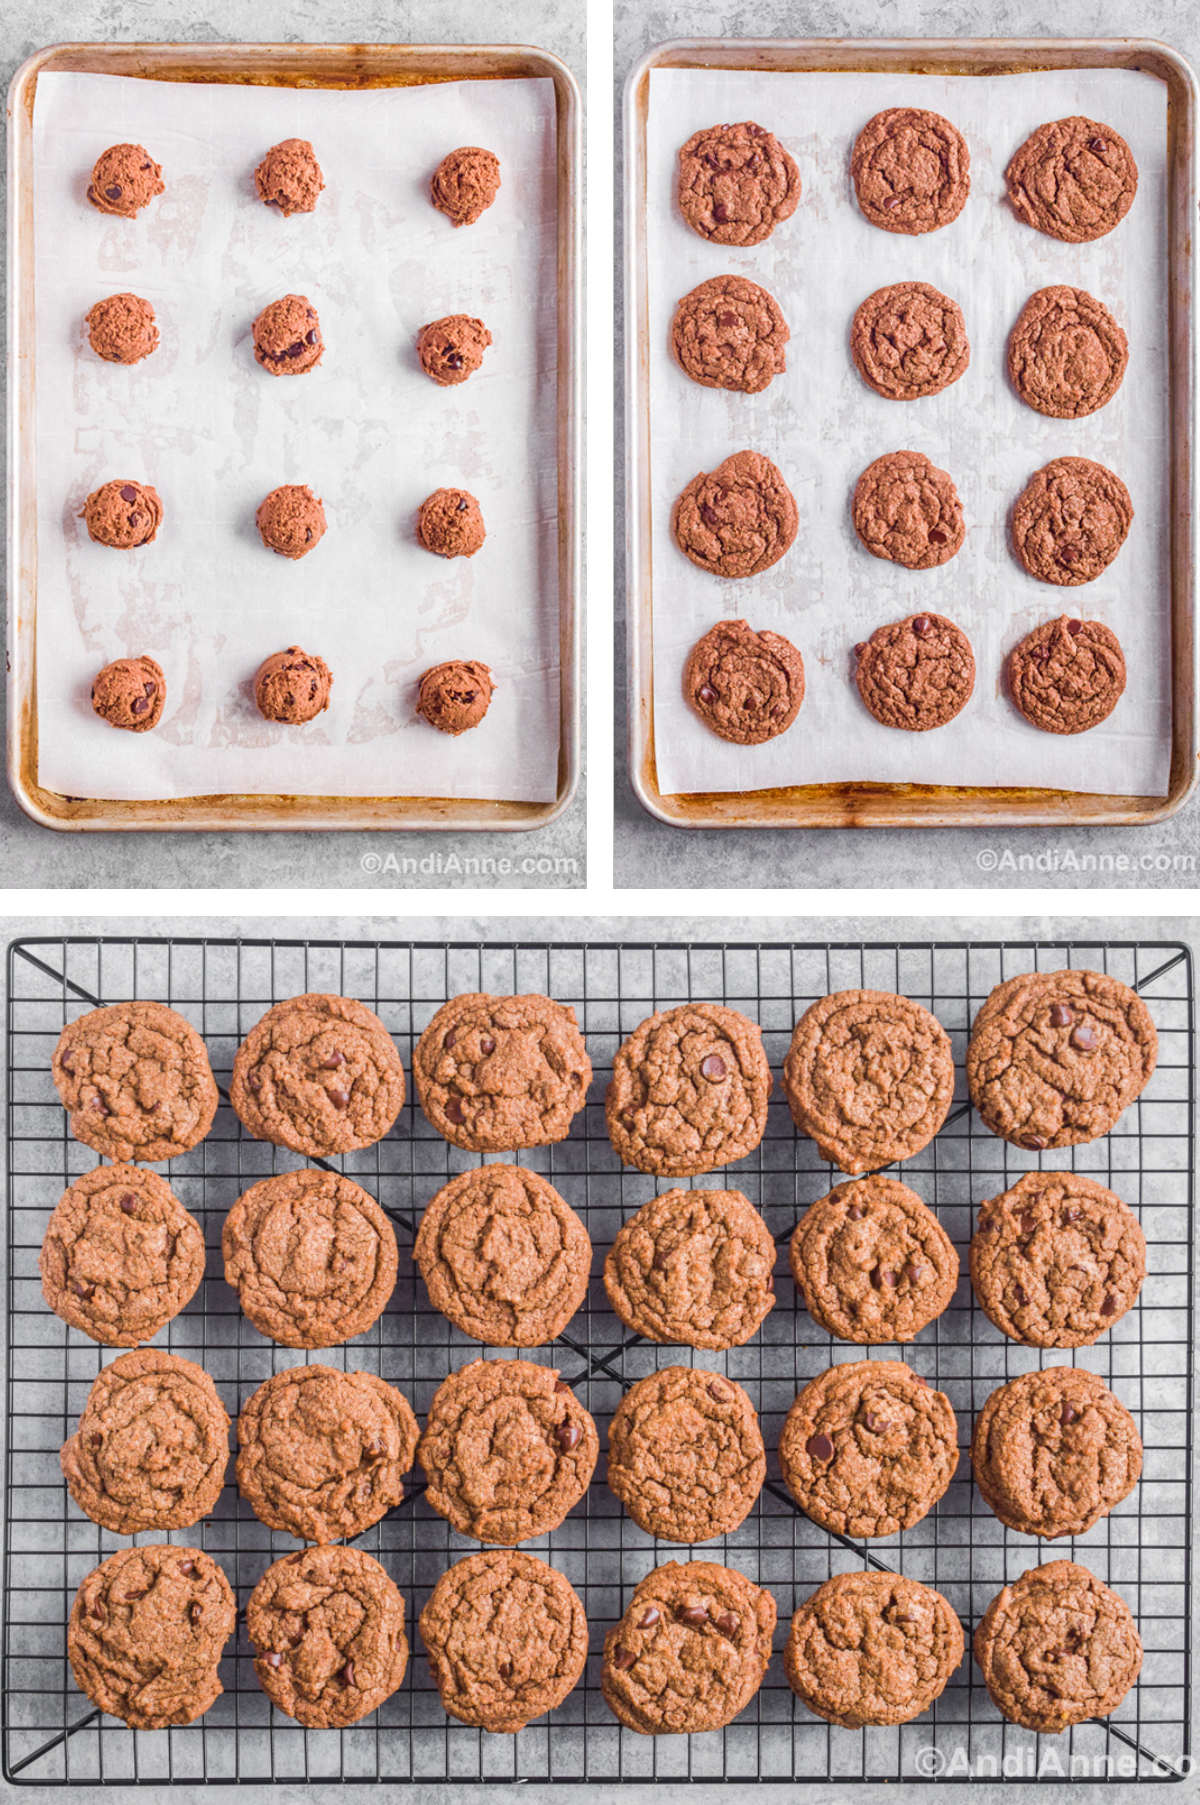 Three overhead images in one: 1. Cookie dough balls on baking sheet. 2. Baked cookies on sheet. 3. Cookies cooling on rack. 